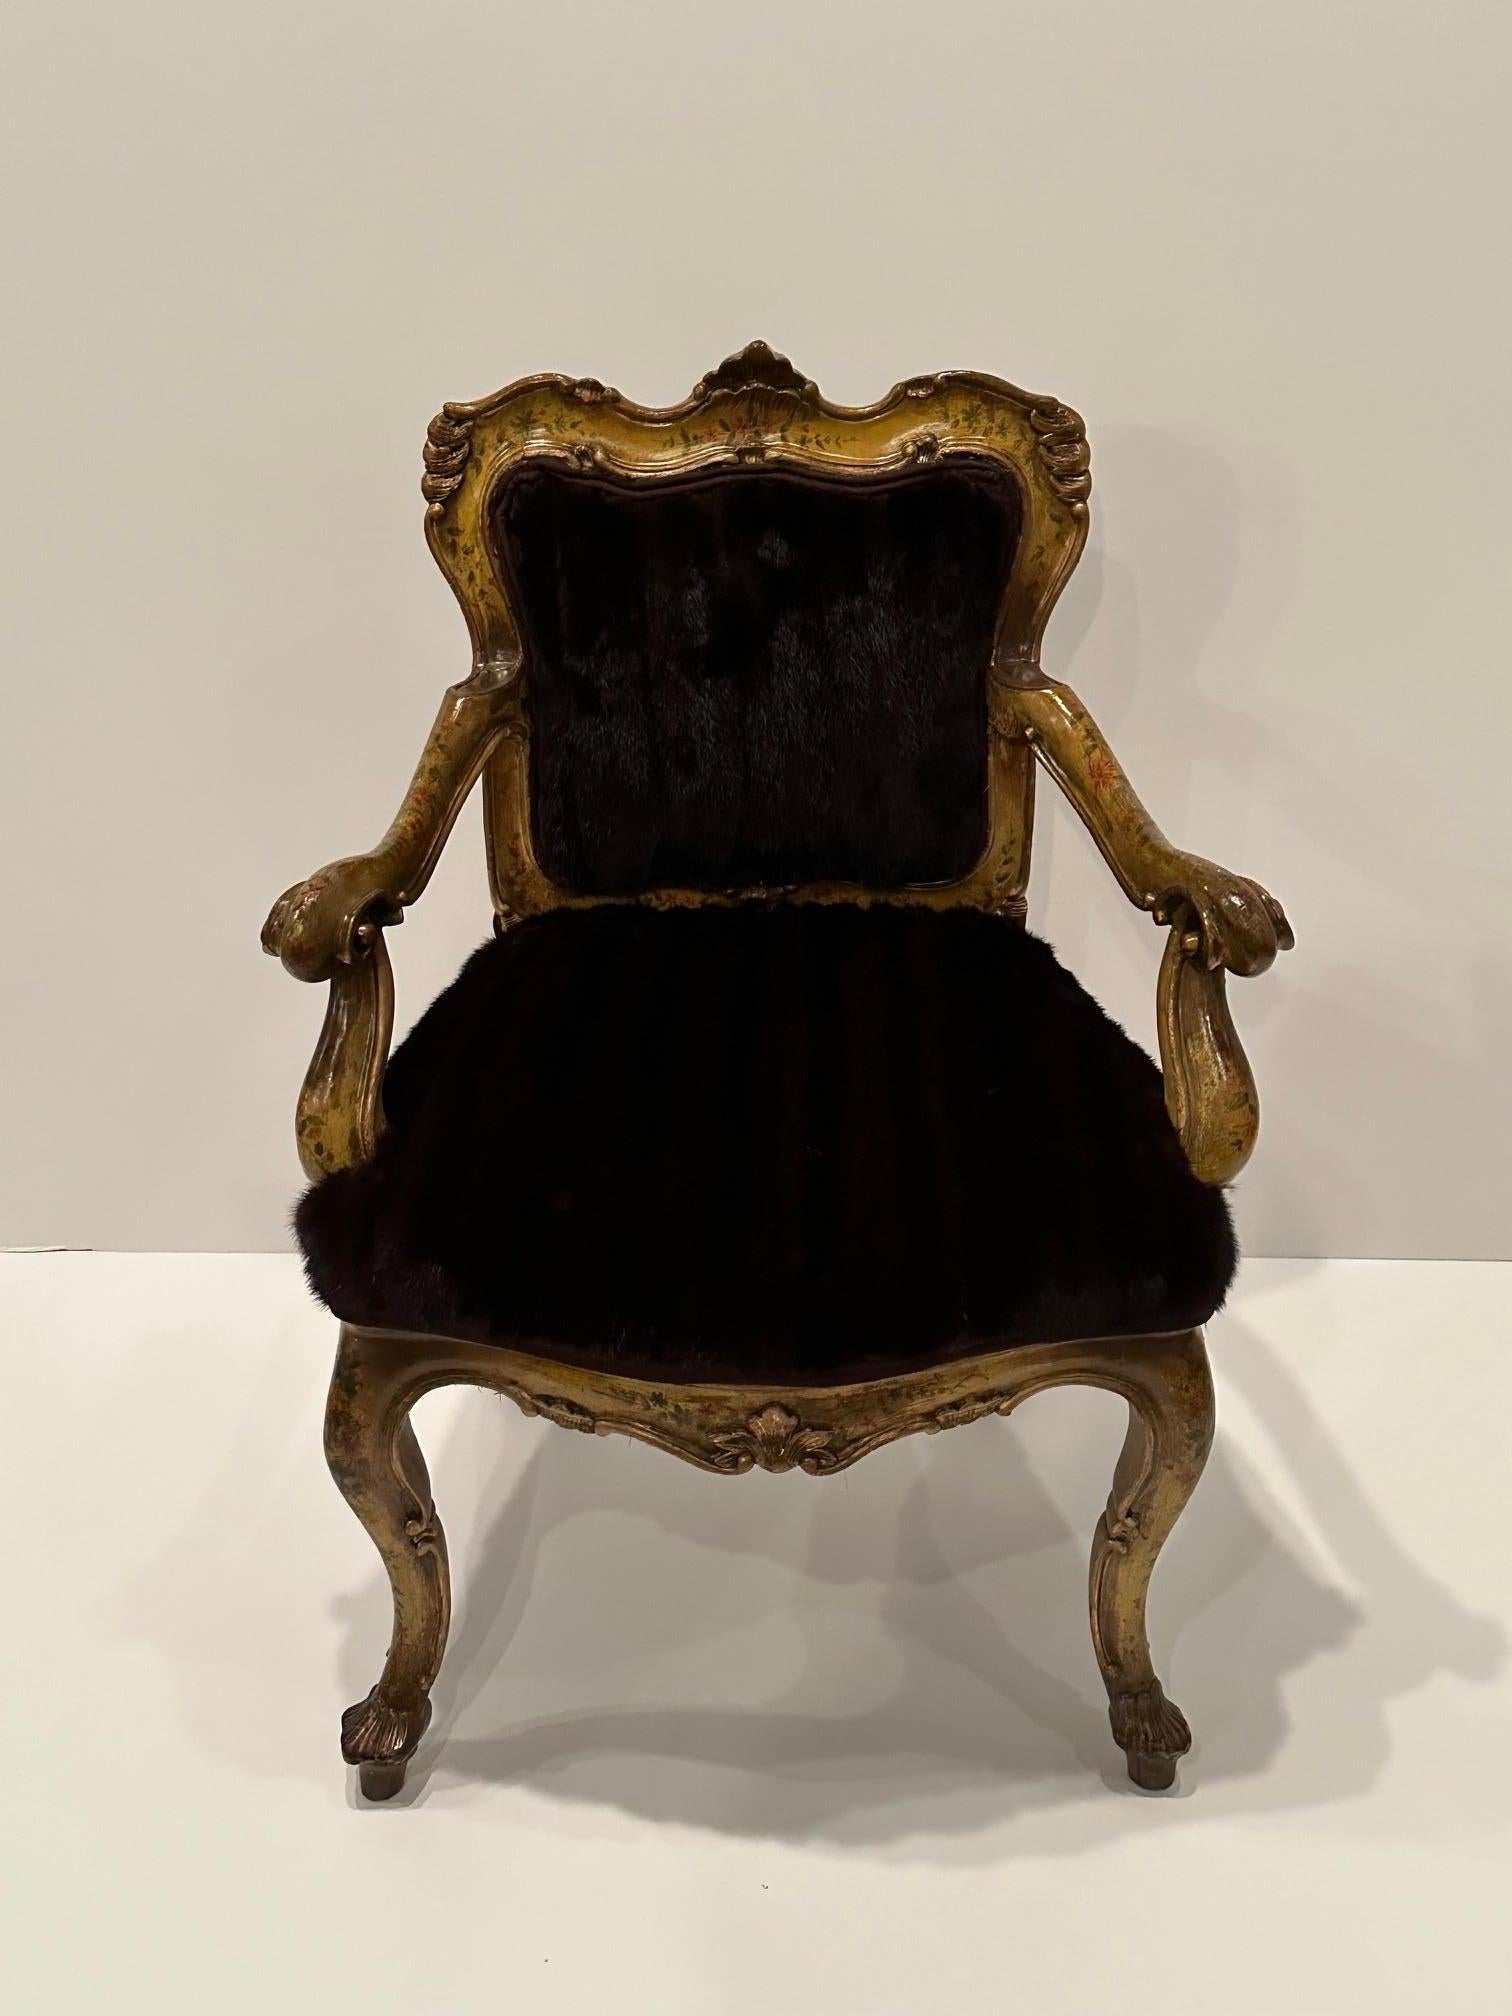 Sinfully Rich Ornate Italian Painted Venetian Armchair Upholstered in Mink Fur For Sale 8